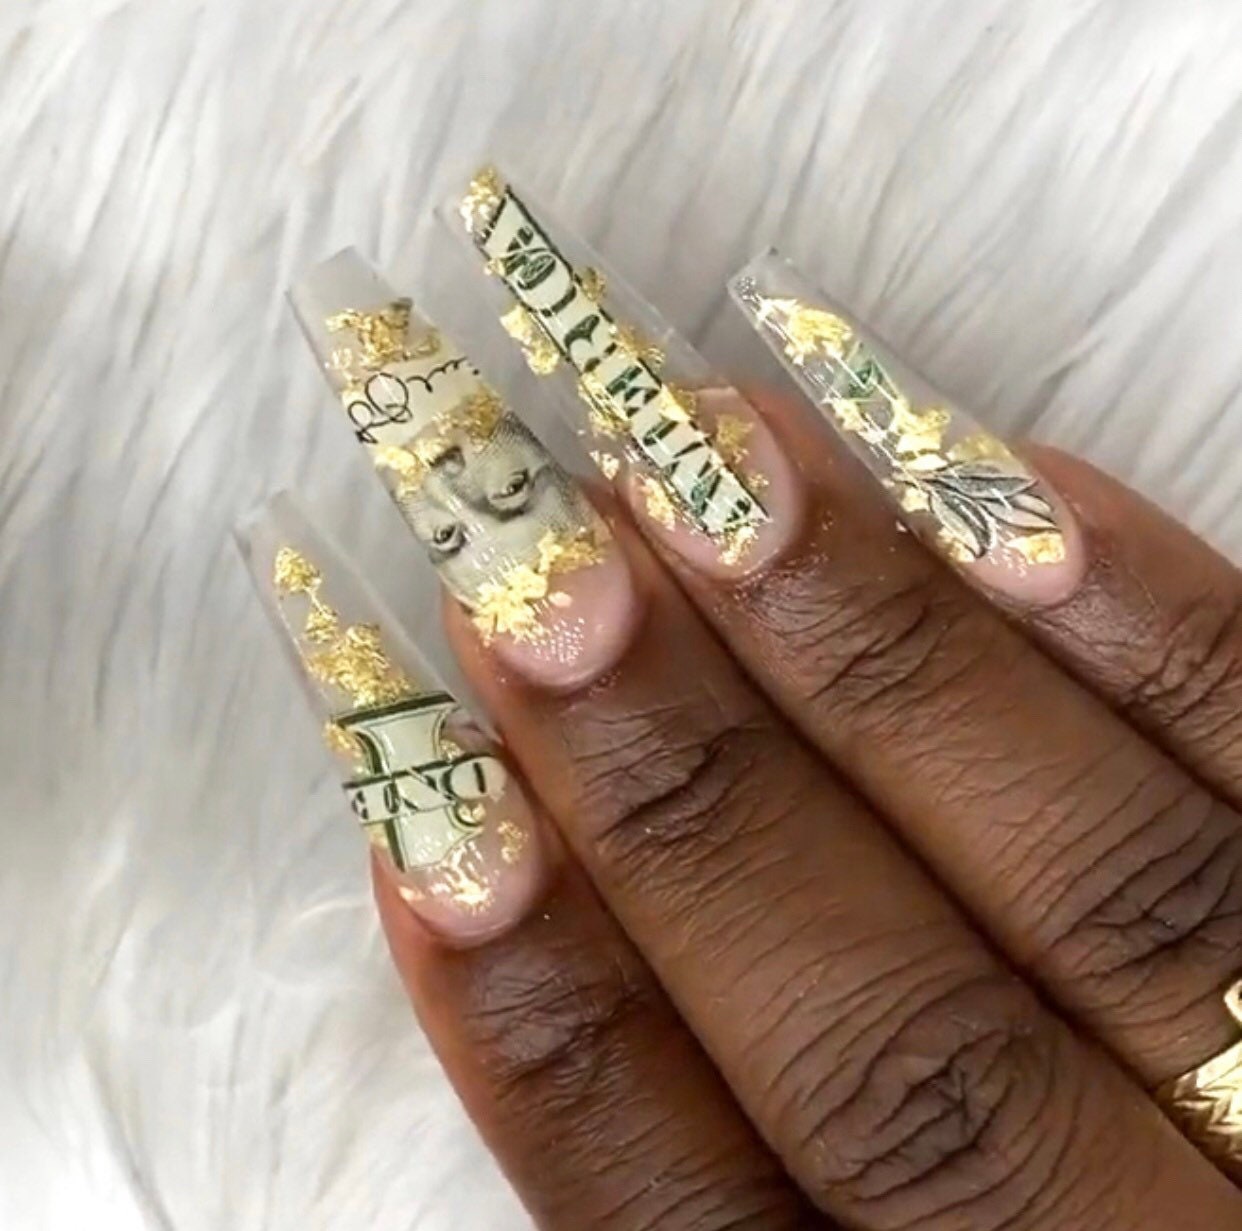 Mix Gold Foil – Nails Blinged Supply